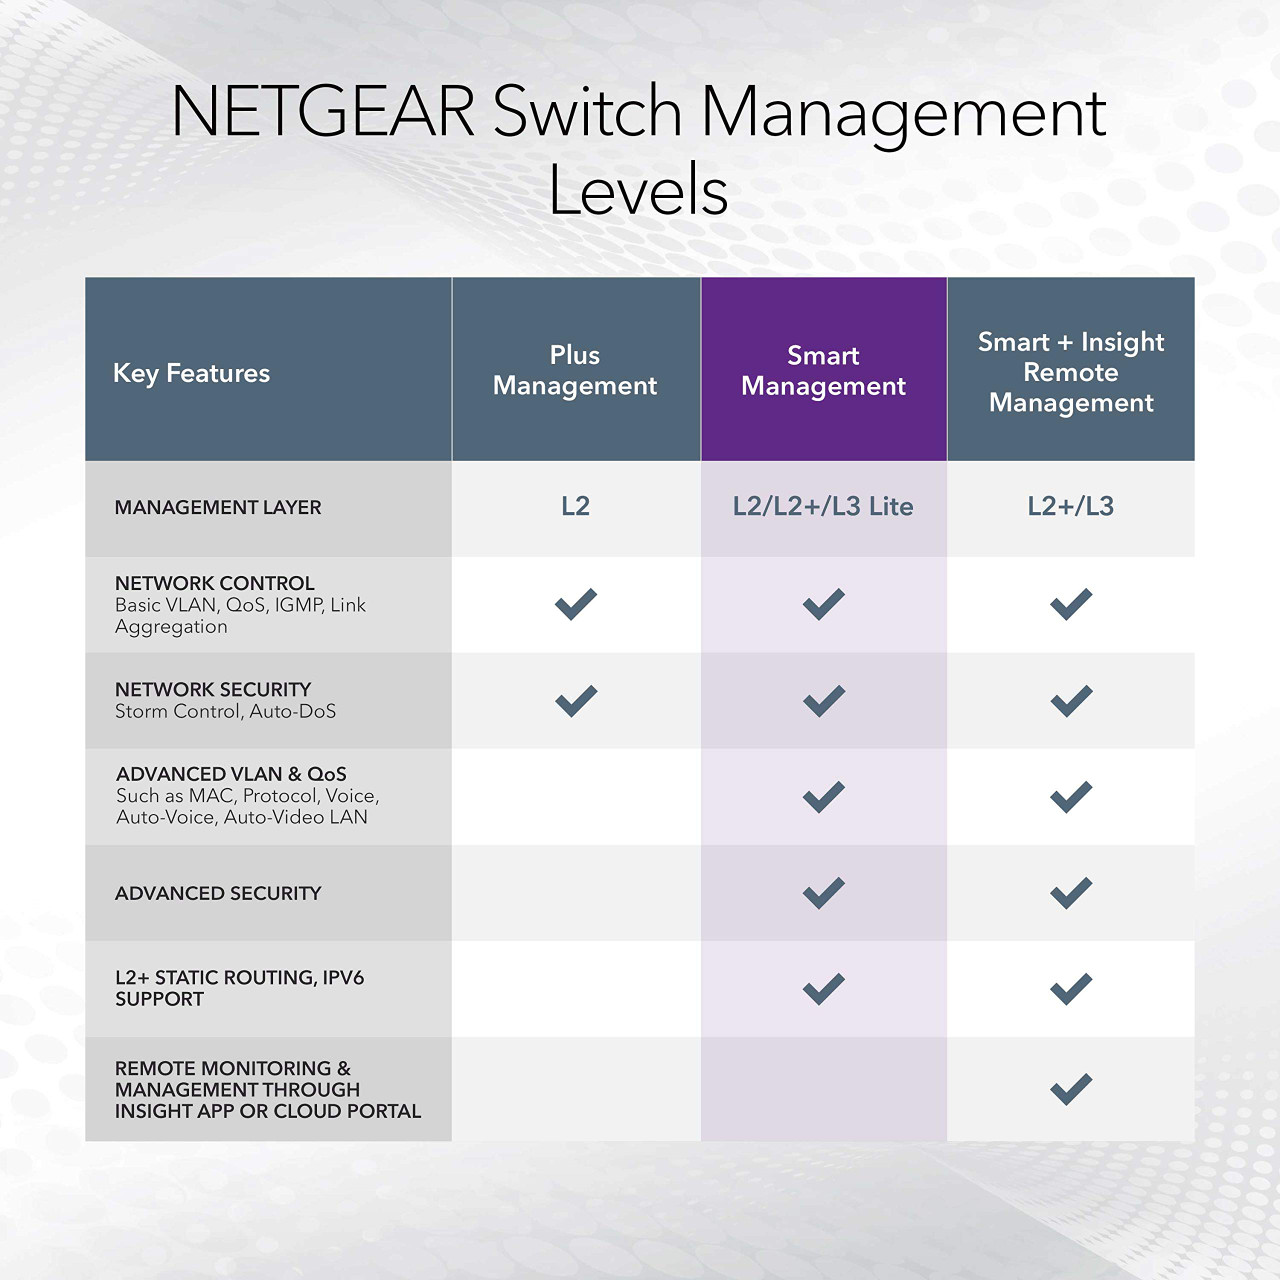 NETGEAR 26-Port Gigabit Ethernet Smart Switch (GS724Tv4) - Managed, with 24 x 1G, 2 x 1G SFP, Desktop or Rackmount, and Limited Lifetime Protection